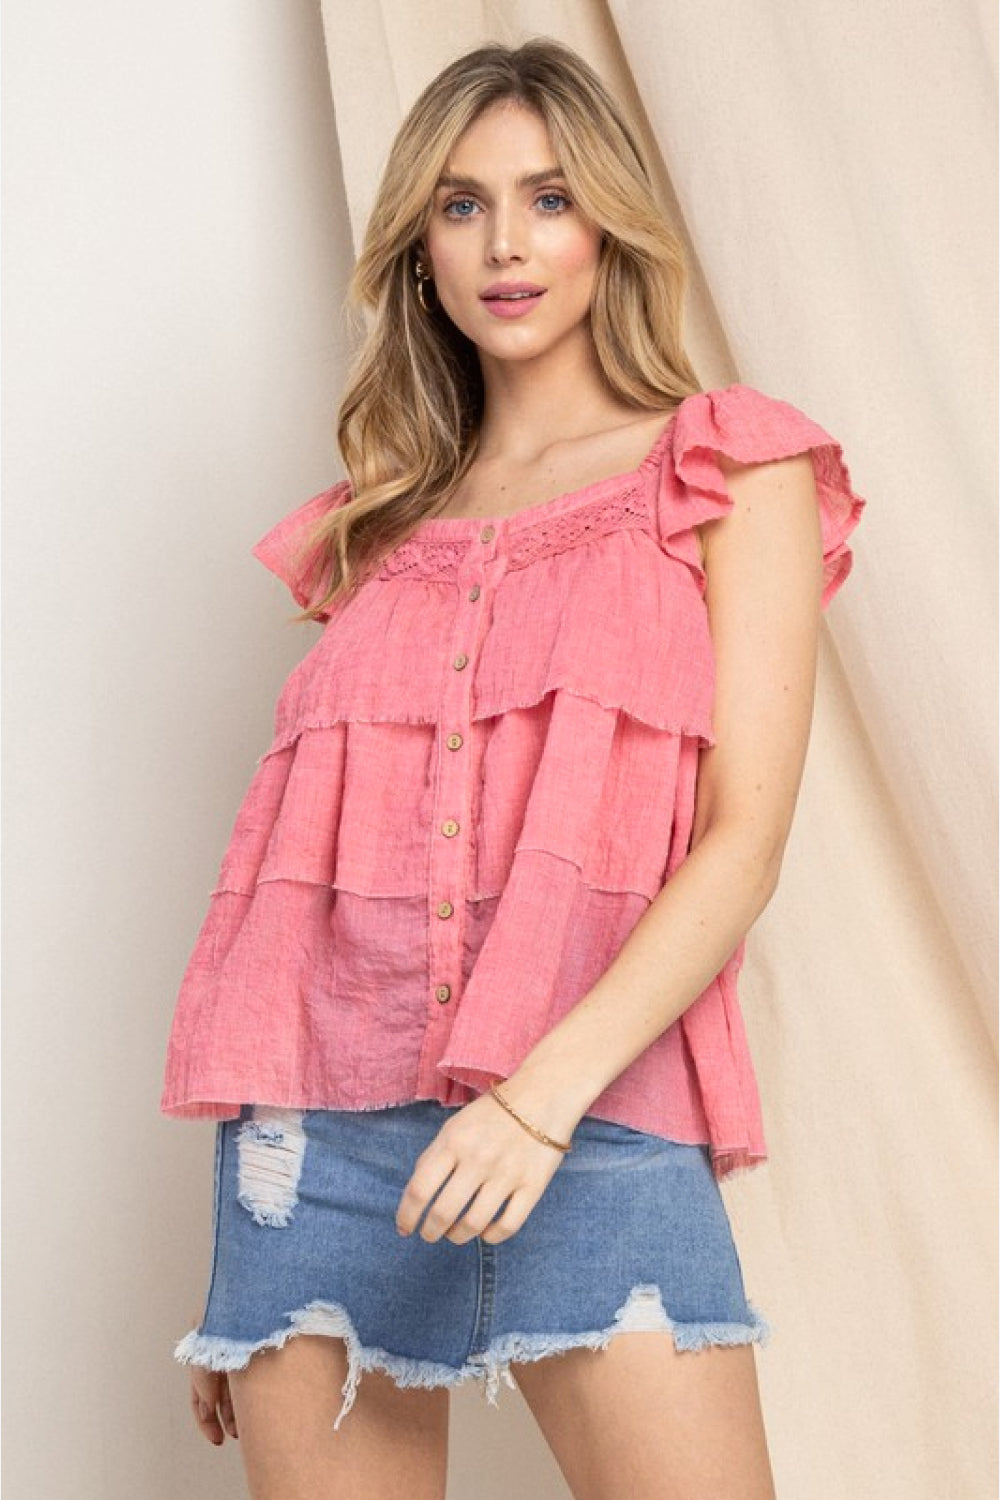 ODDI Full Size Buttoned Ruffled Top - The Downtown Dachshund